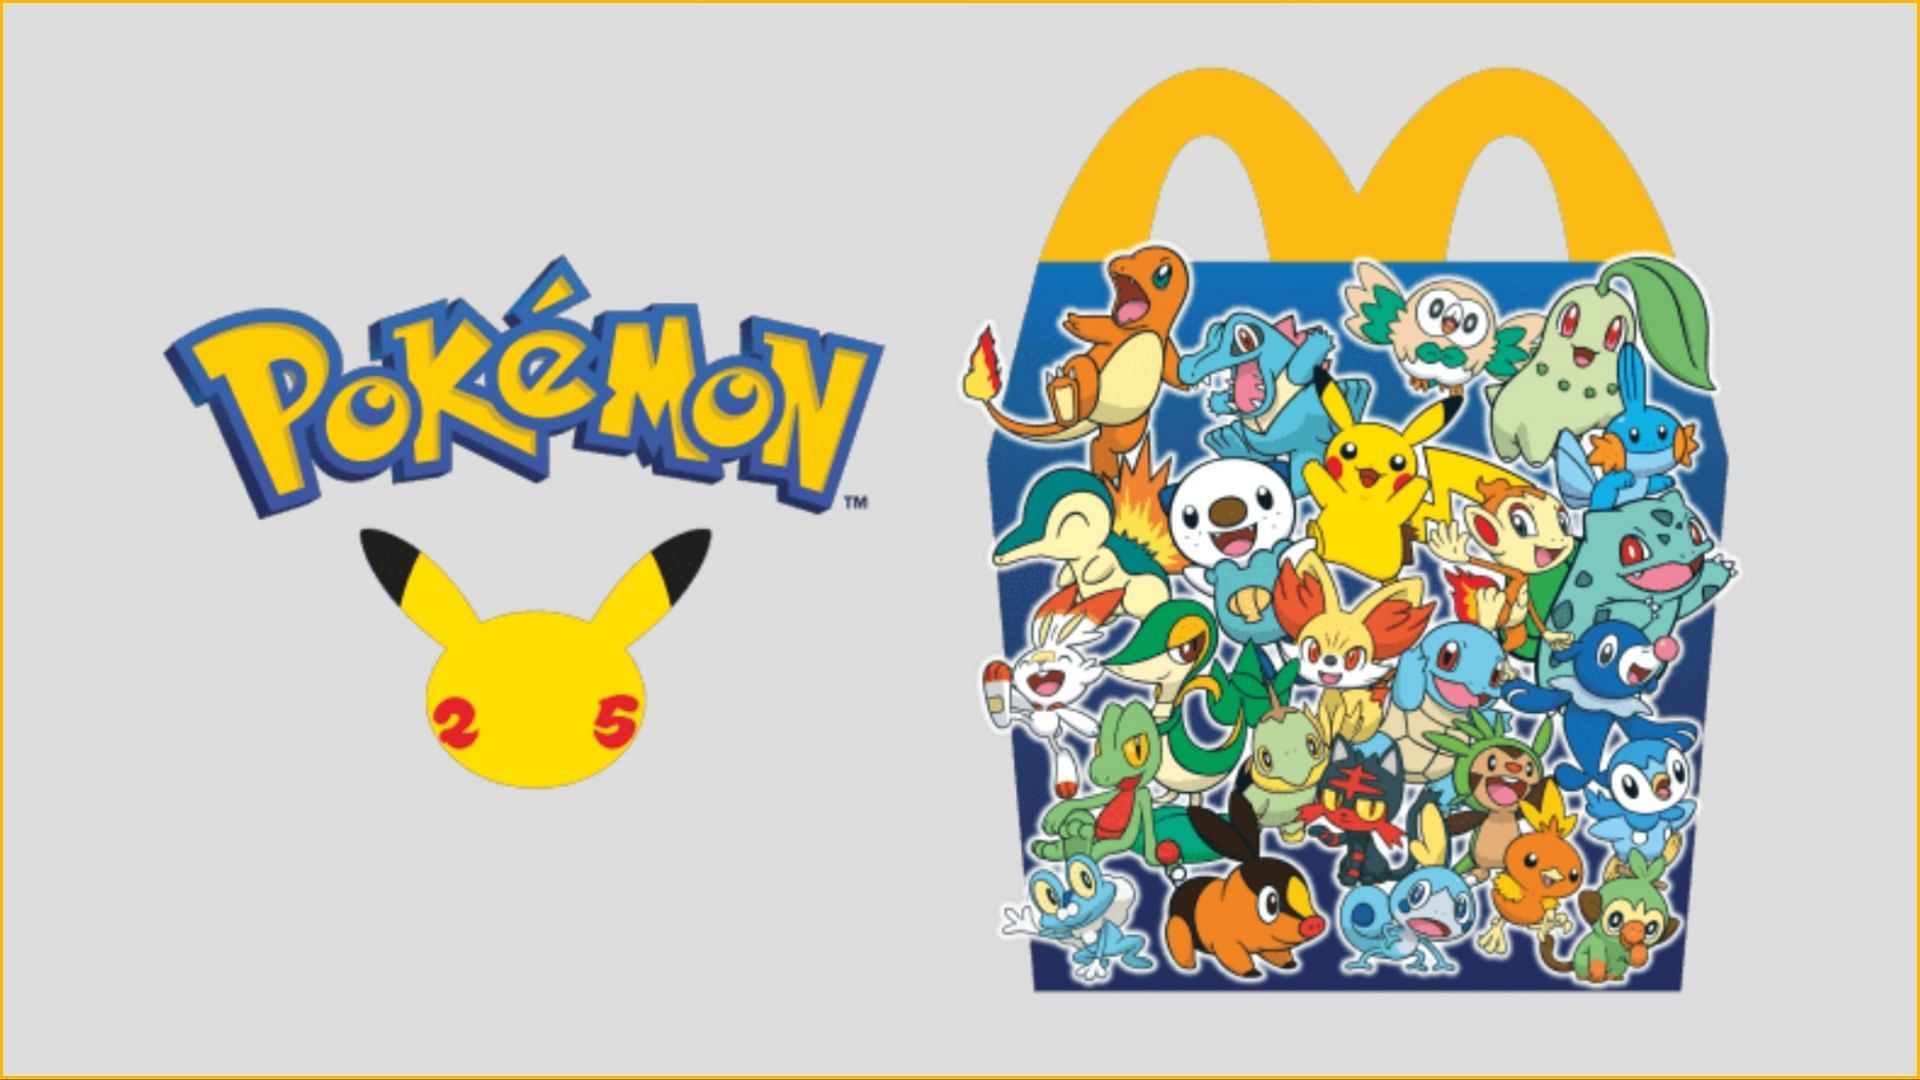 Yall remember what happened last time Mcdonalds had pokemon cards